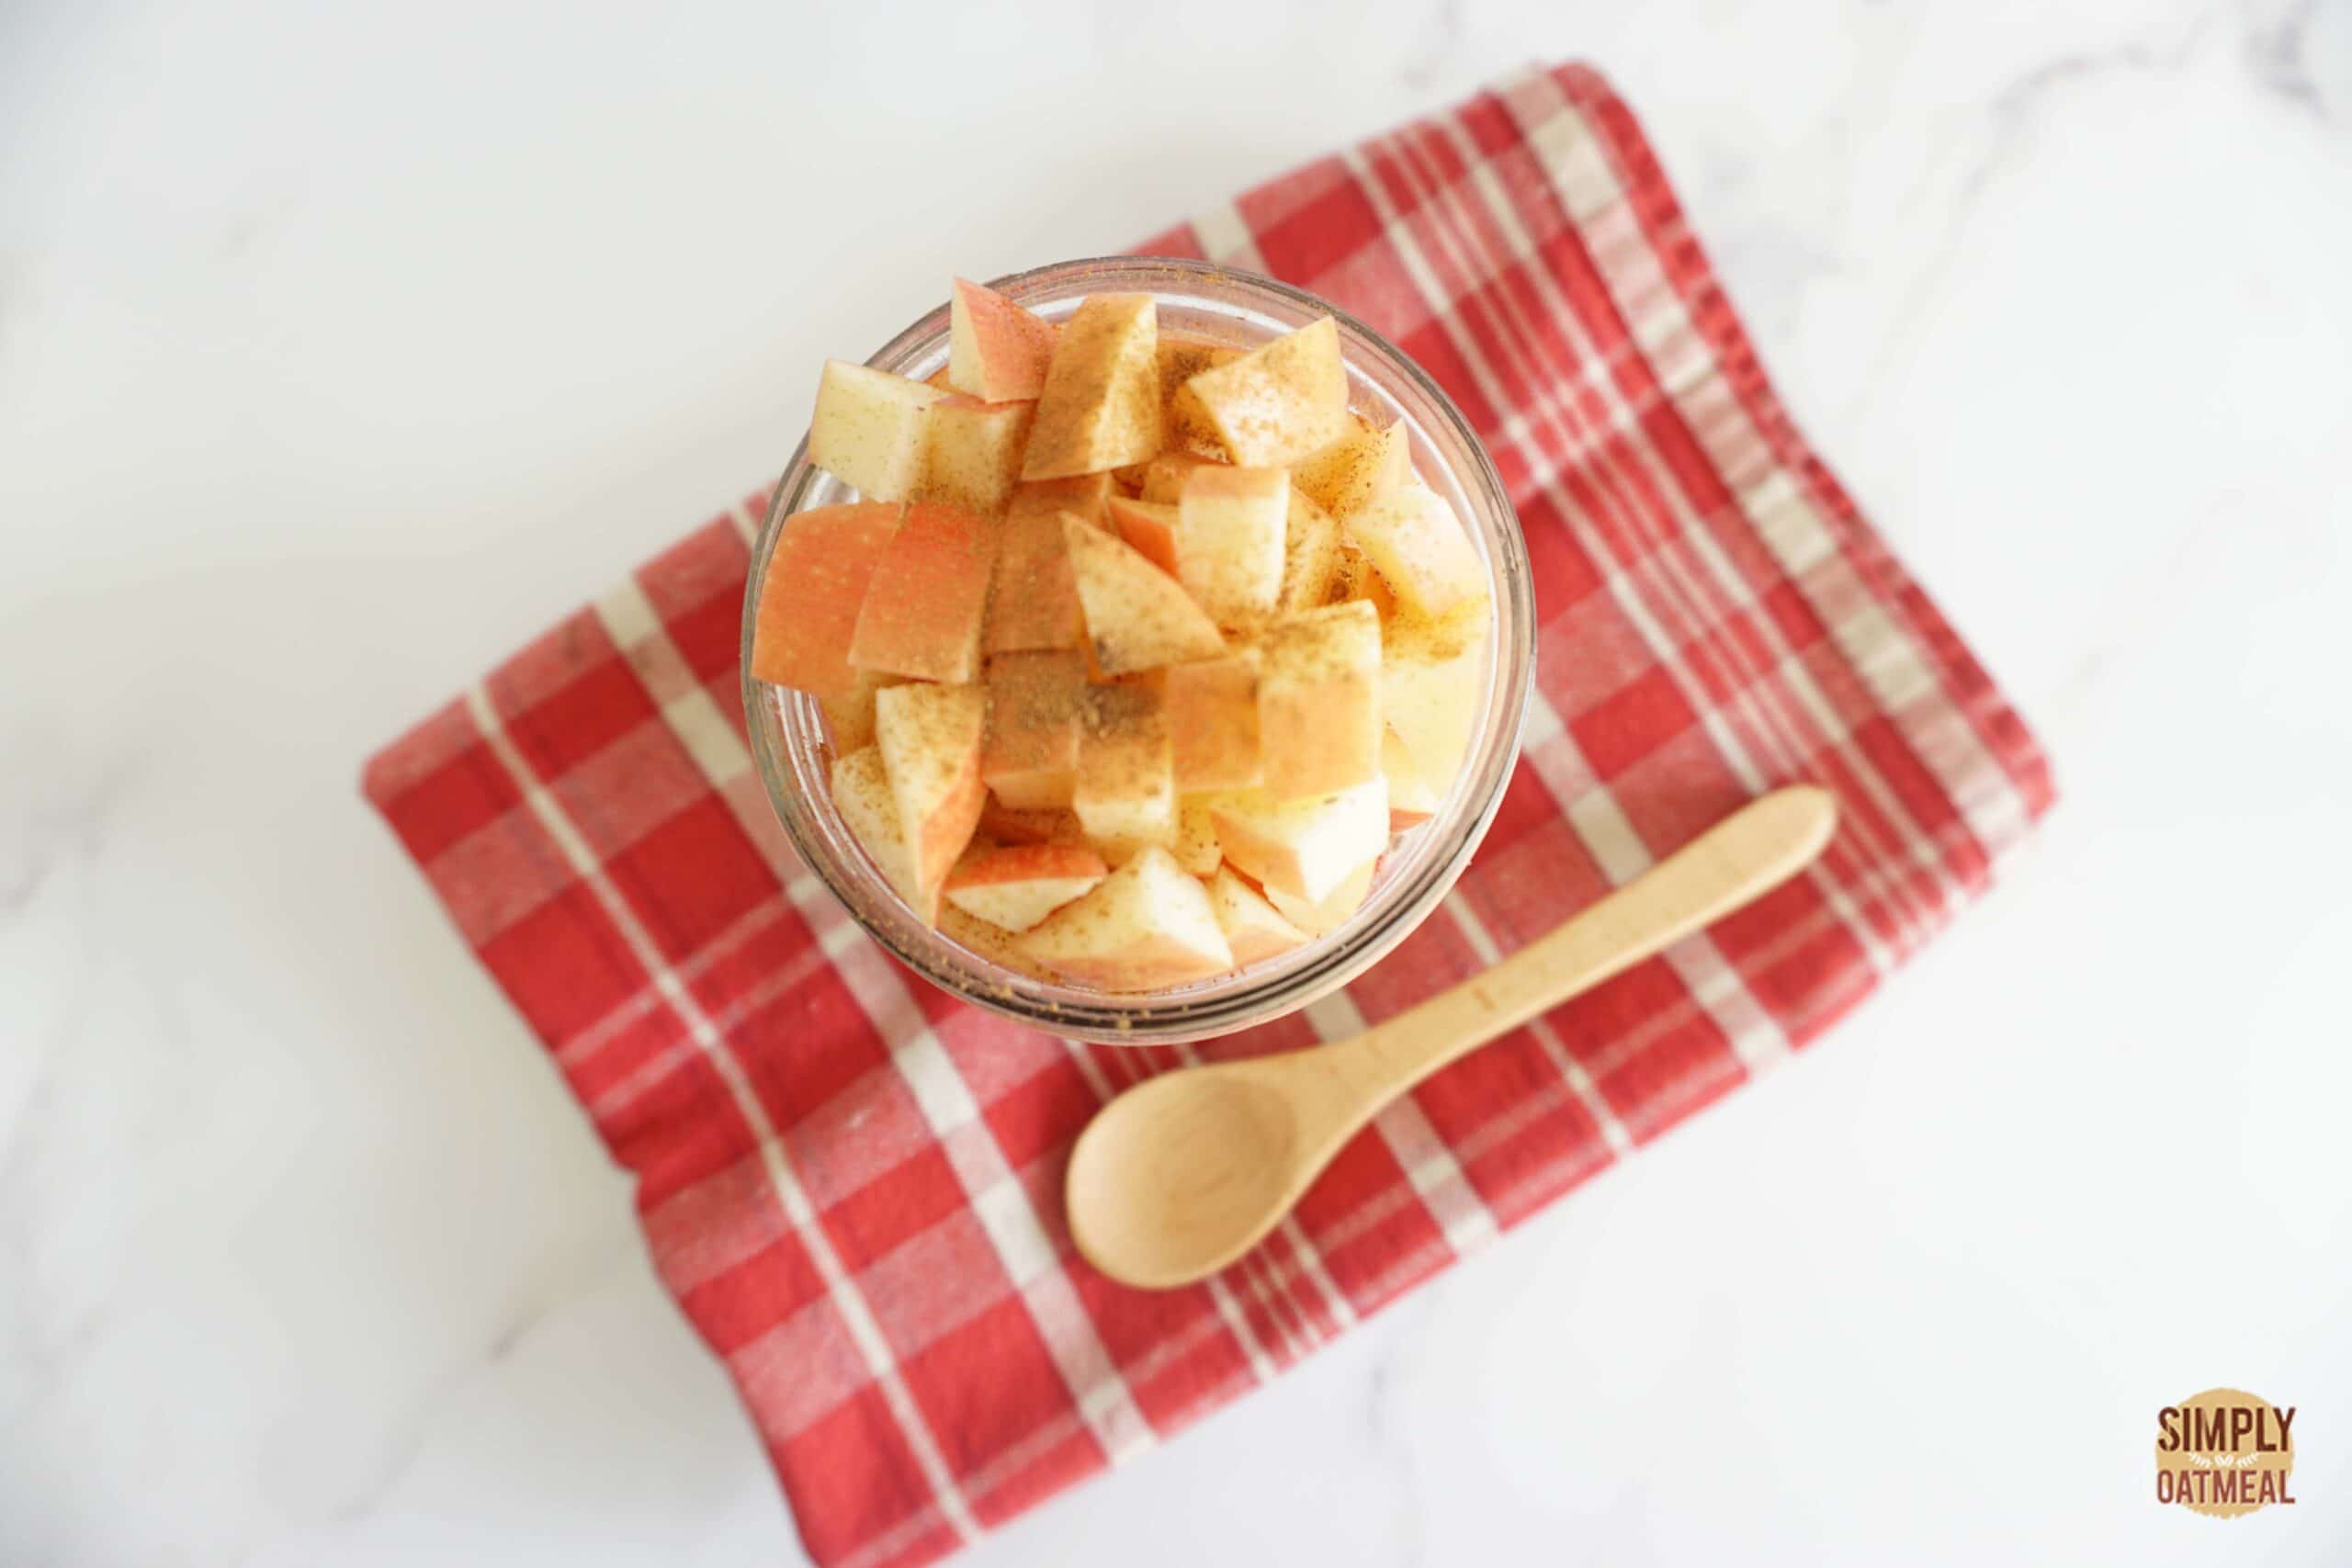 Apple raspberry overnight oats topped with diced apple and a dash of cinnamon.